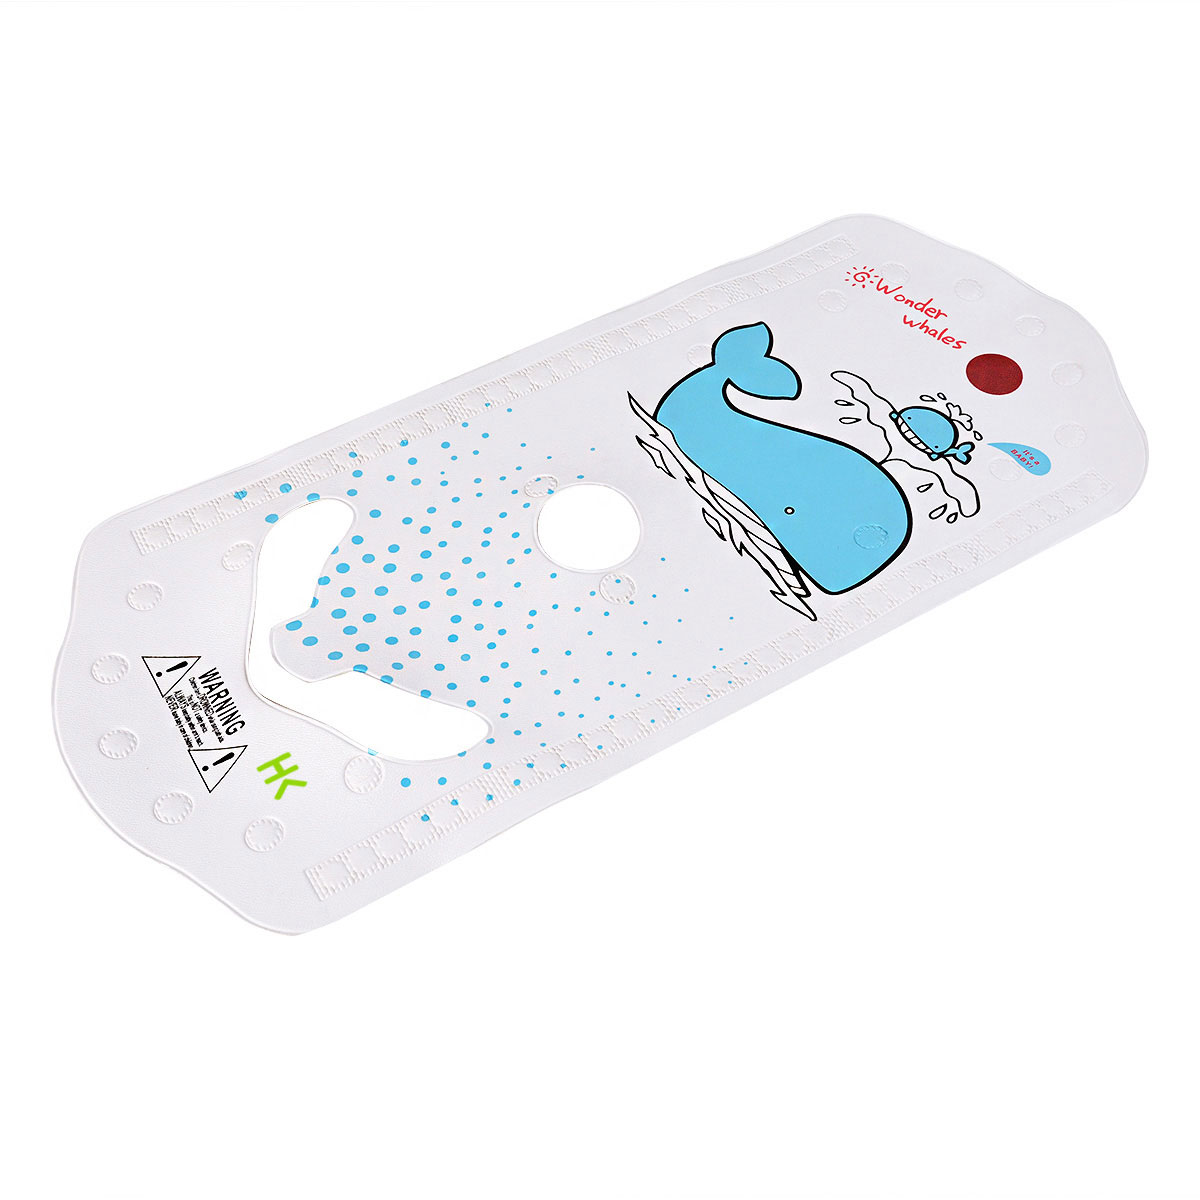 HK Infant Baby Safety Bath Support Seat Chair Sling Bather Mat for Tub Non-slip Heat Sensitive Mat (Blue)